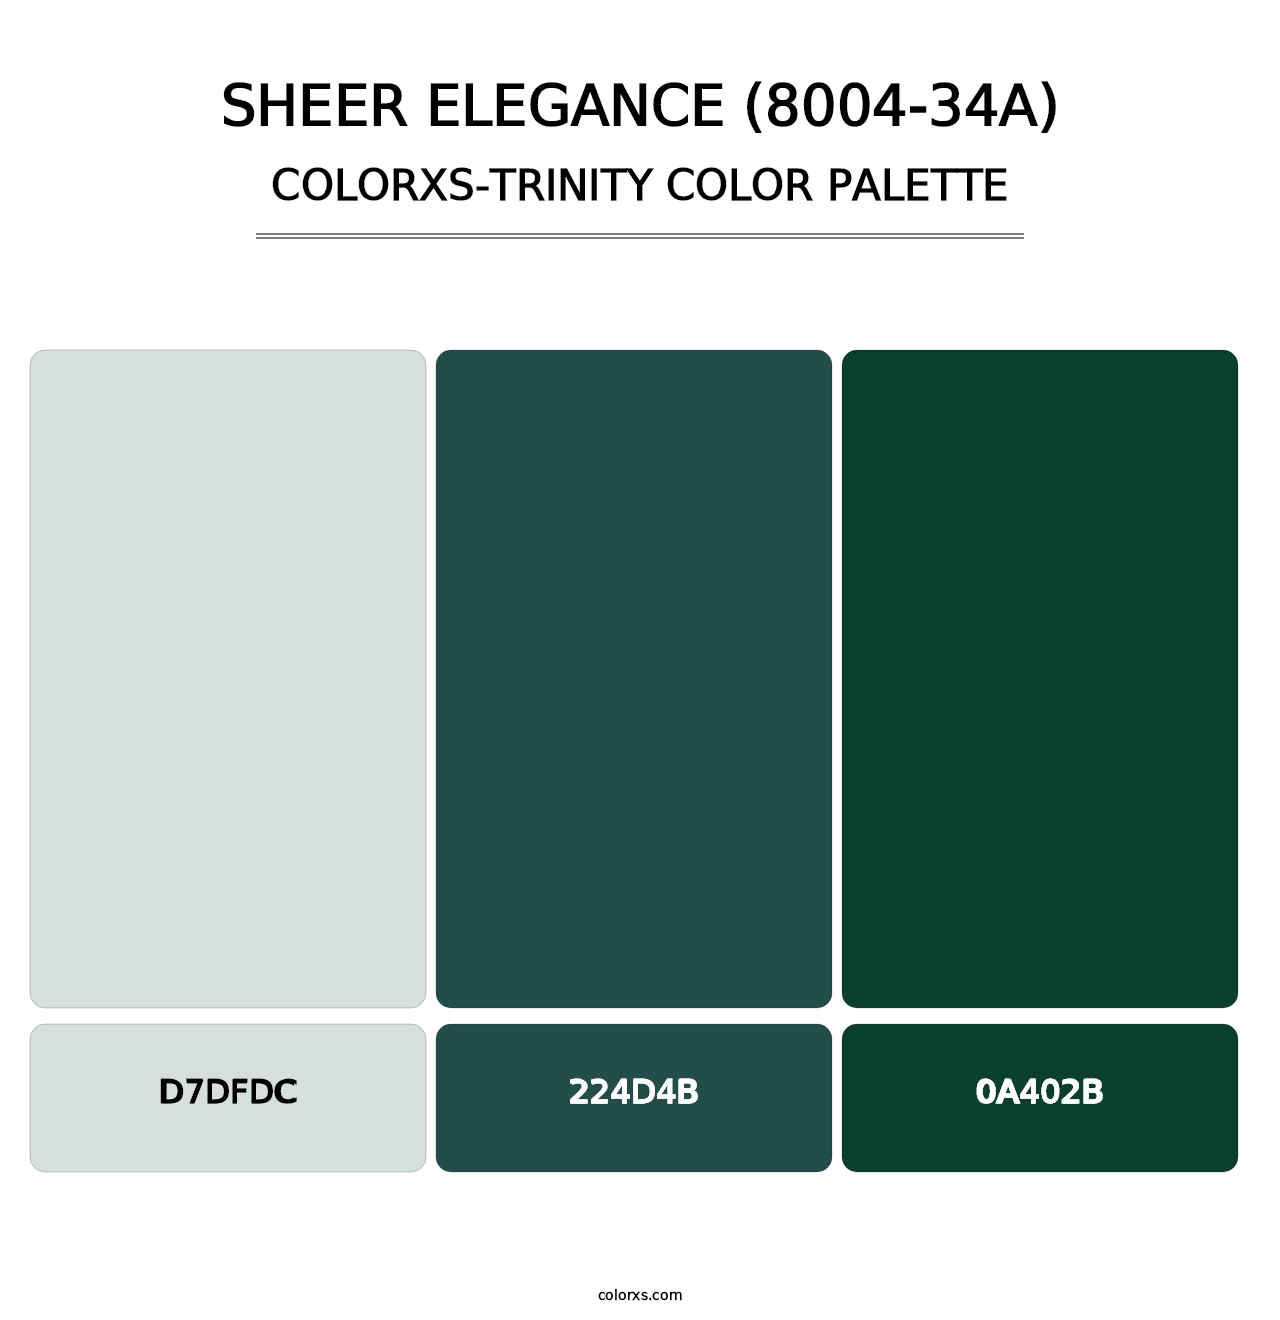 Sheer Elegance (8004-34A) - Colorxs Trinity Palette